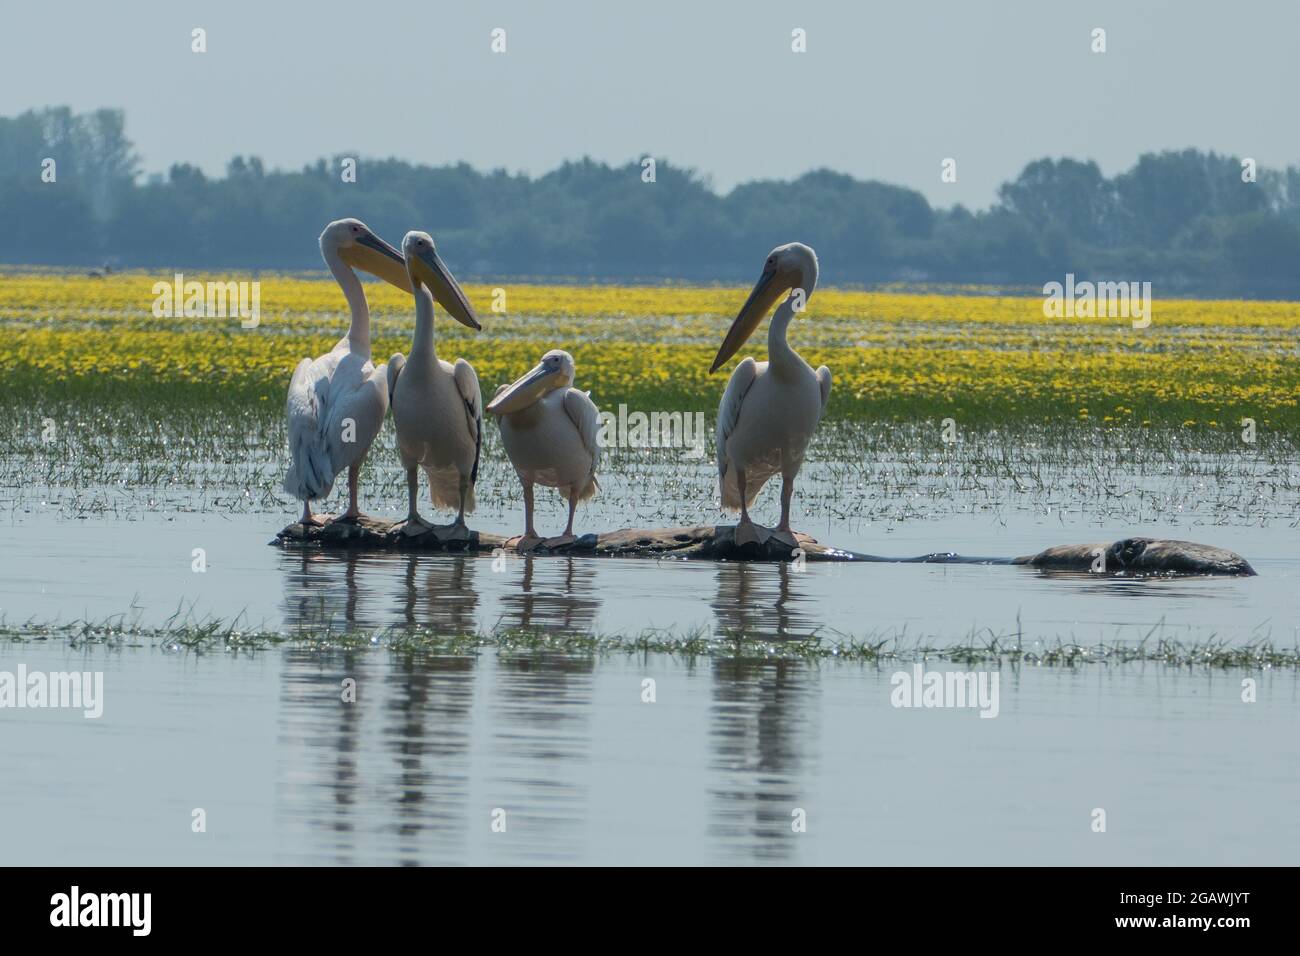 Lake Kerkini, Greece, July 13, 2021: Pelicans form the genus of birds Pelecanus, the only representative of the Pelecanidae family which has eight liv Stock Photo